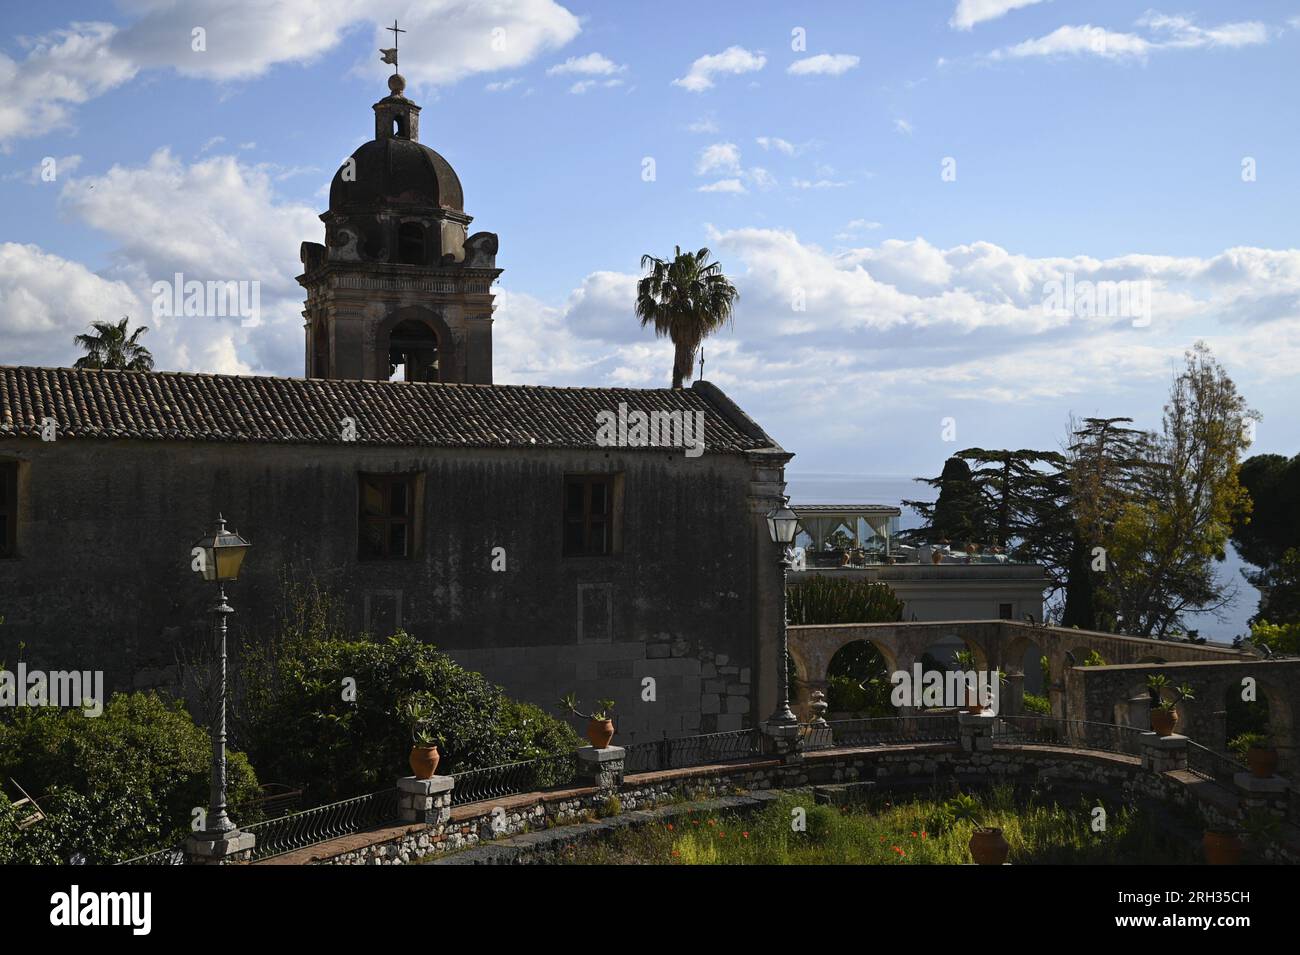 Landscape with scenic view of the Baroque style Chiesa di San Pancrazio a historic religious monument of Taormina in Sicily, Italy. Stock Photo